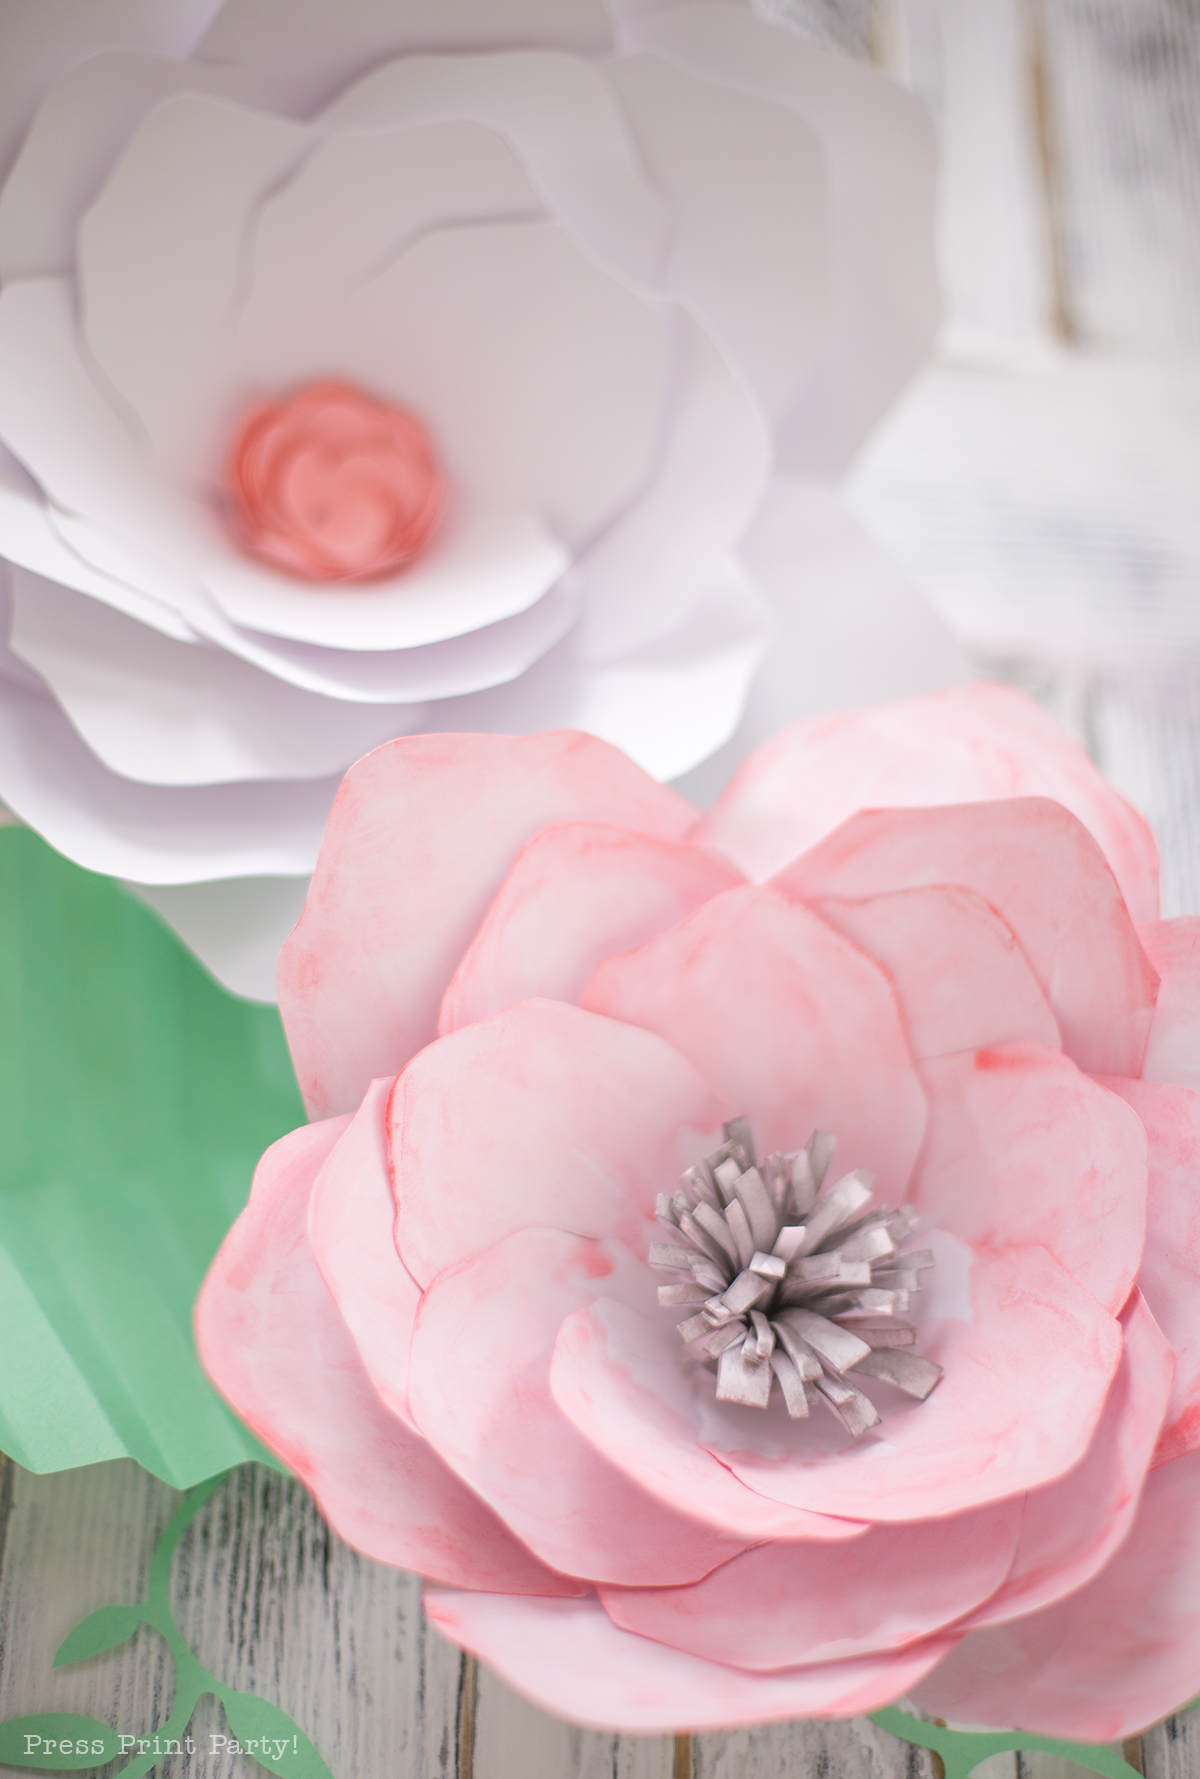 A closeup overhead view of two large paper flowers used to decorate a baby shower. One flower is pink, and the other is white and includes paper greenery. The templates for these paper flowers can be found on catchingcolorflies.com. 